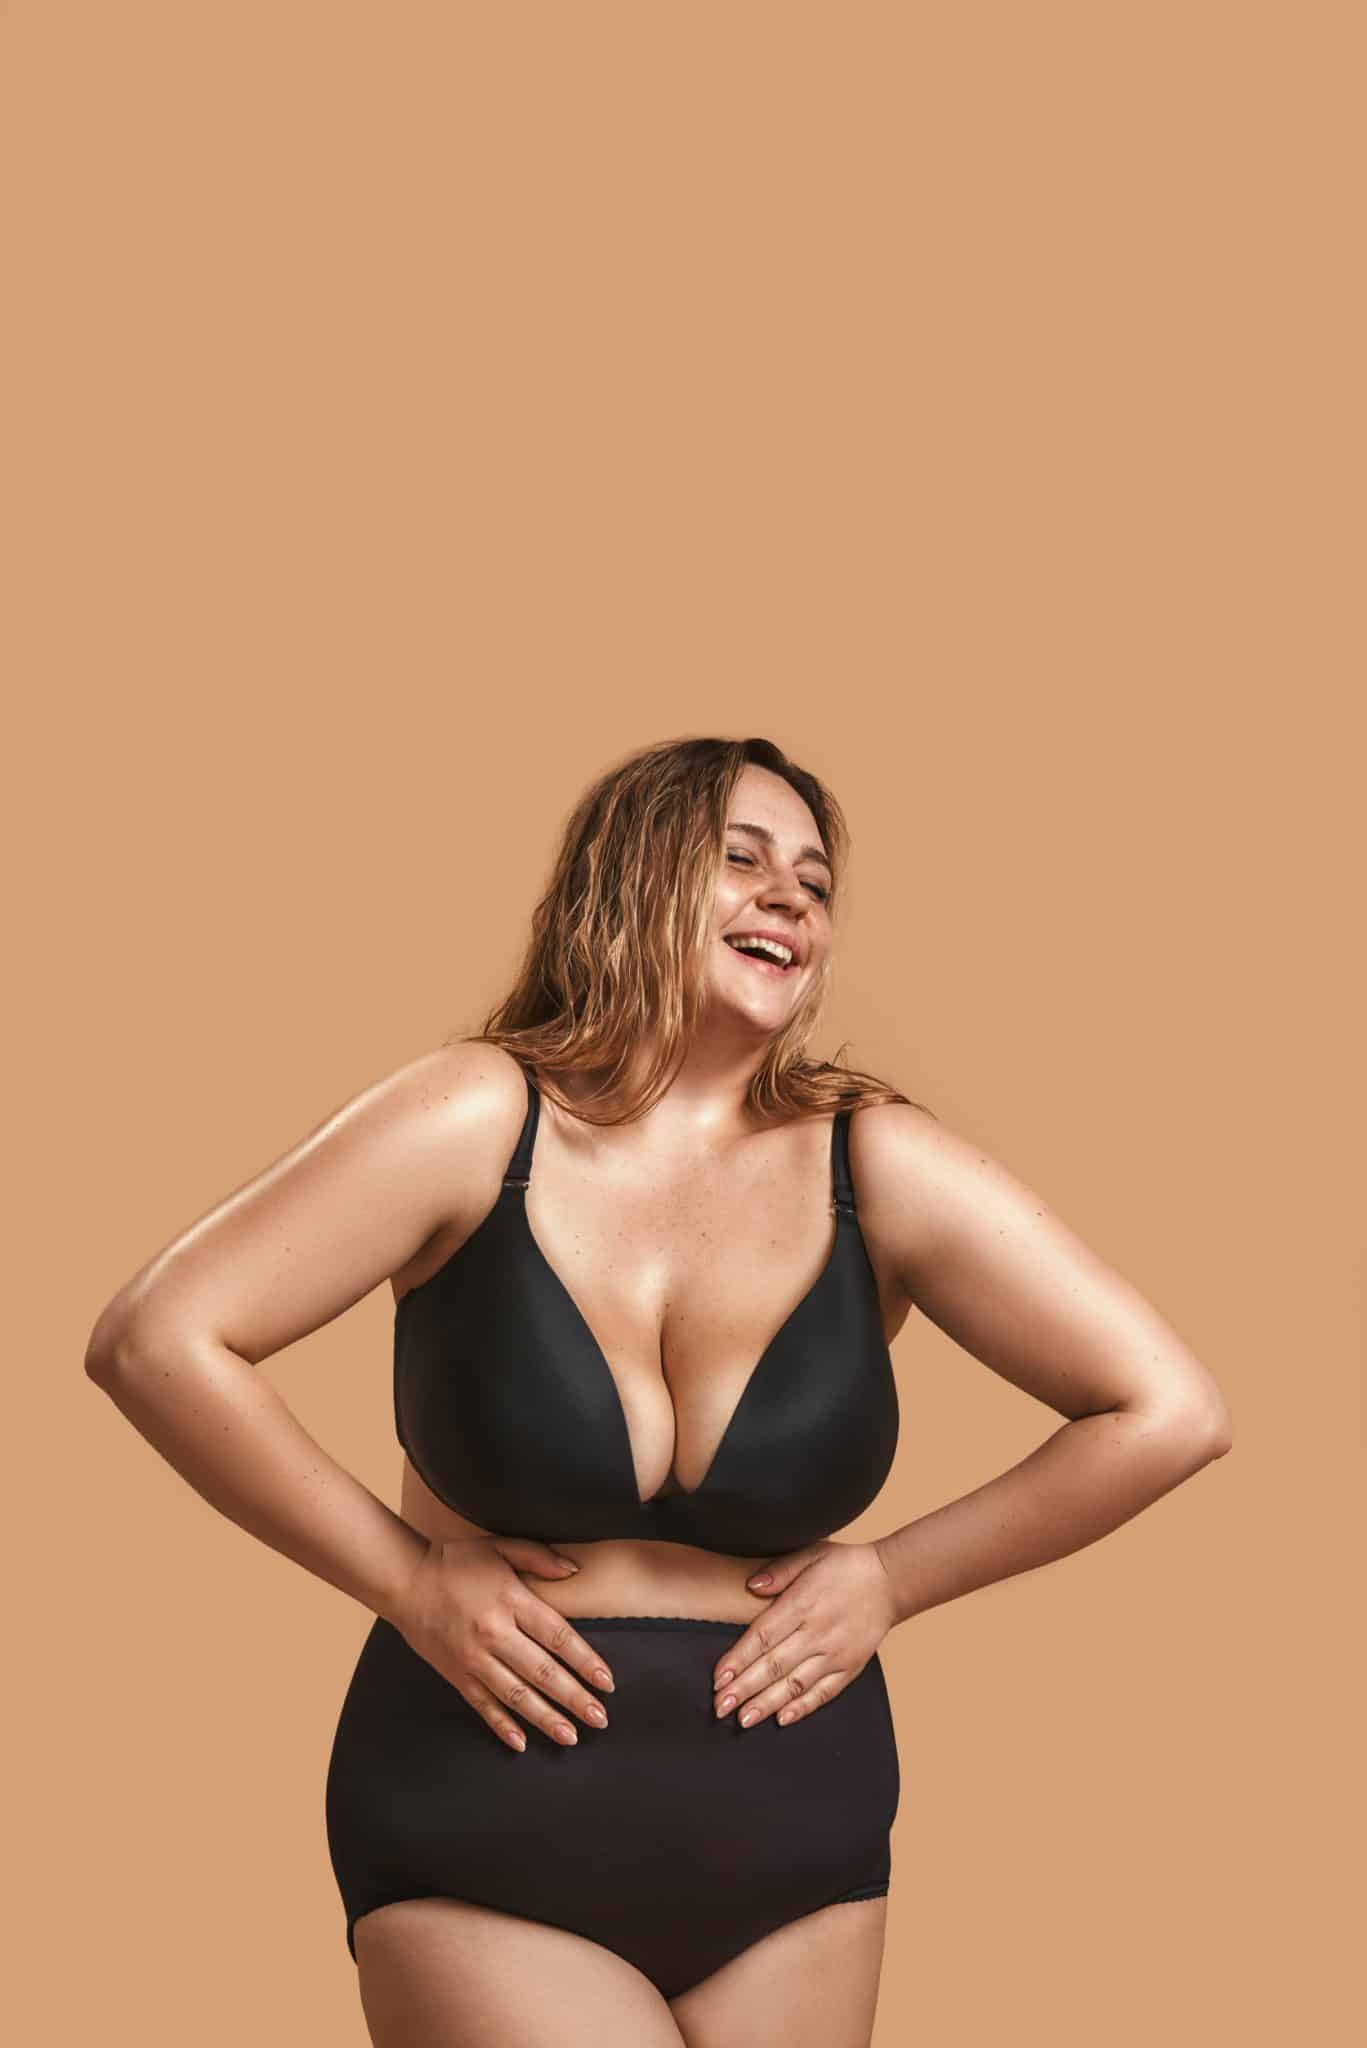 How to feel sexy in Shapewear